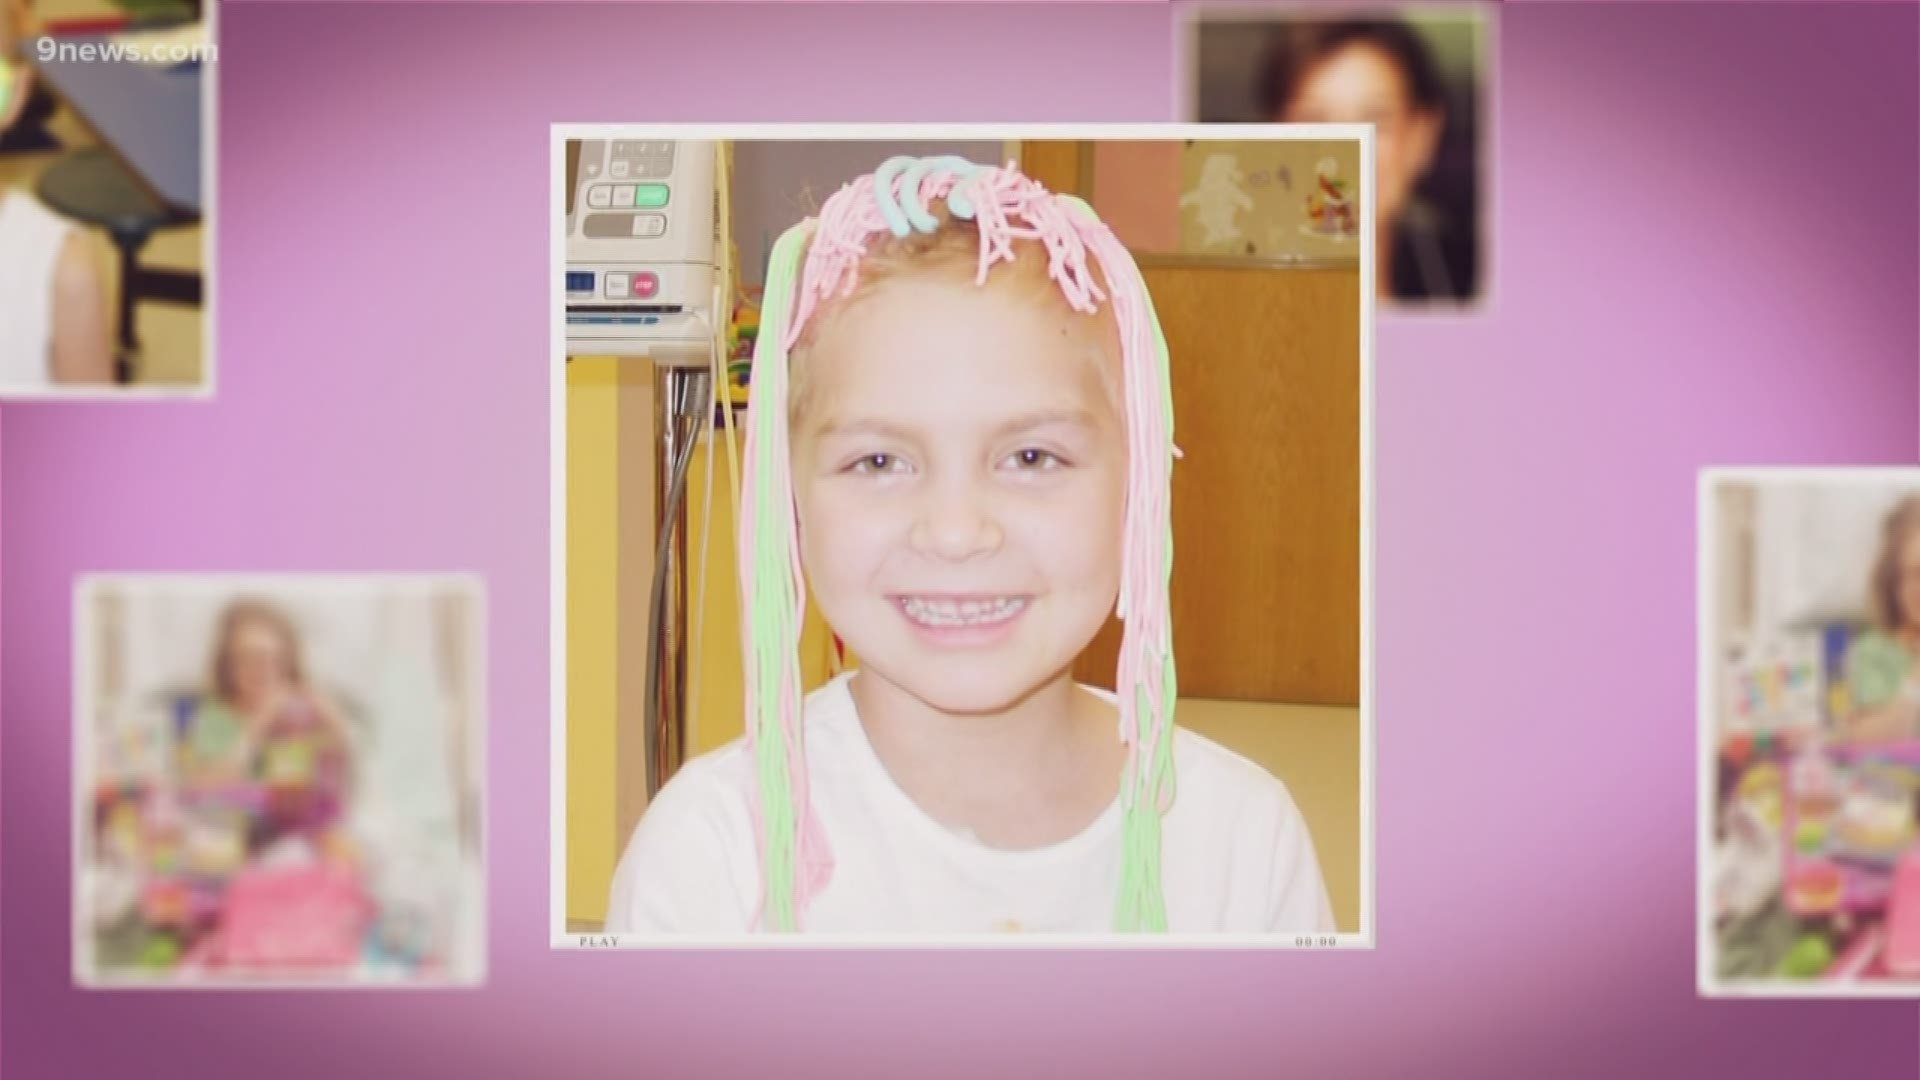 Gabby was a fun-loving 6-year-old who lost her battle to brain cancer in September 2004. Her mother Tammy created the nonprofit Bags for Fun in her memory.